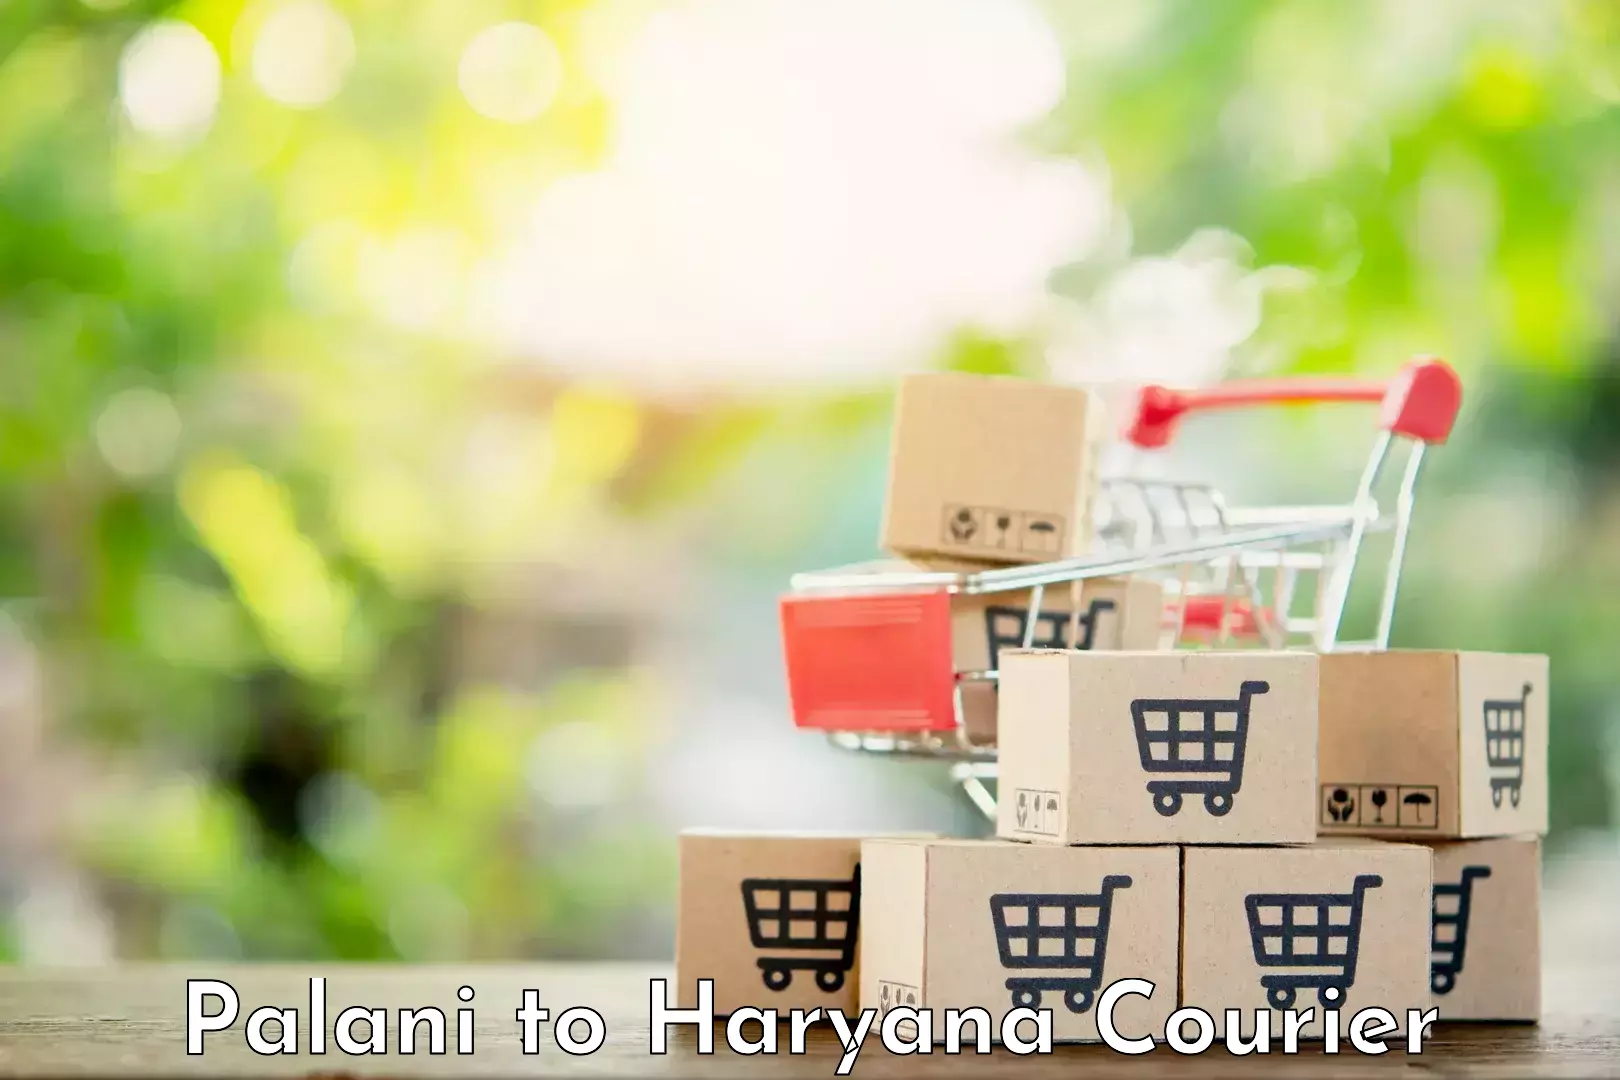 Special handling courier Palani to Haryana